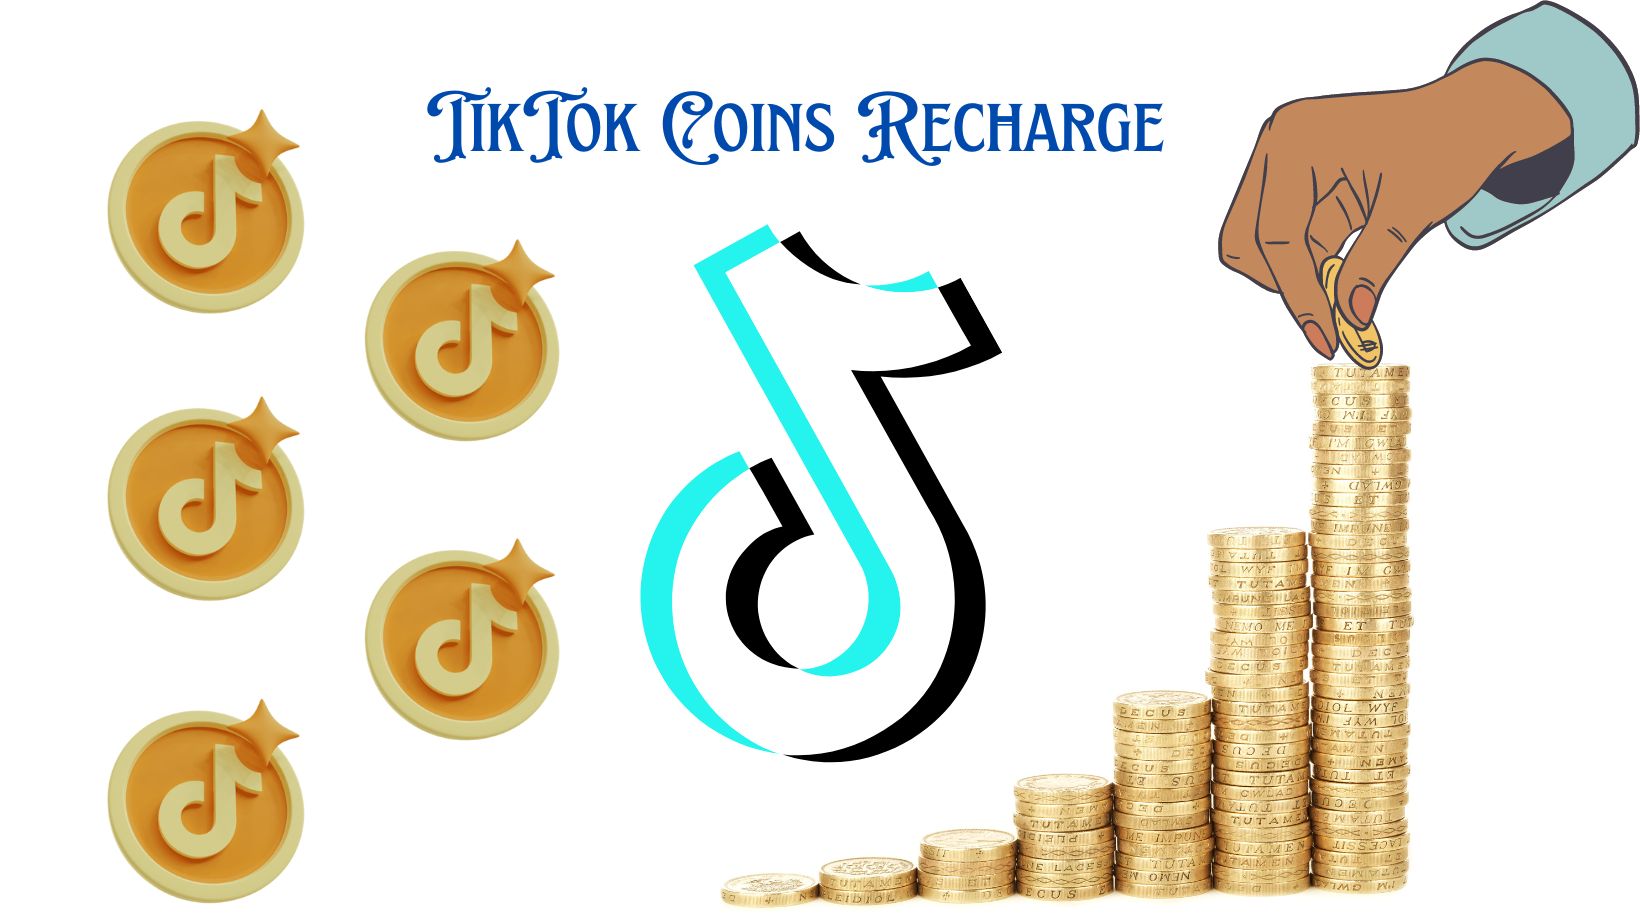 How to Tiktok Coins Recharge: Types, Benefits & A Guide For Recharge Coins